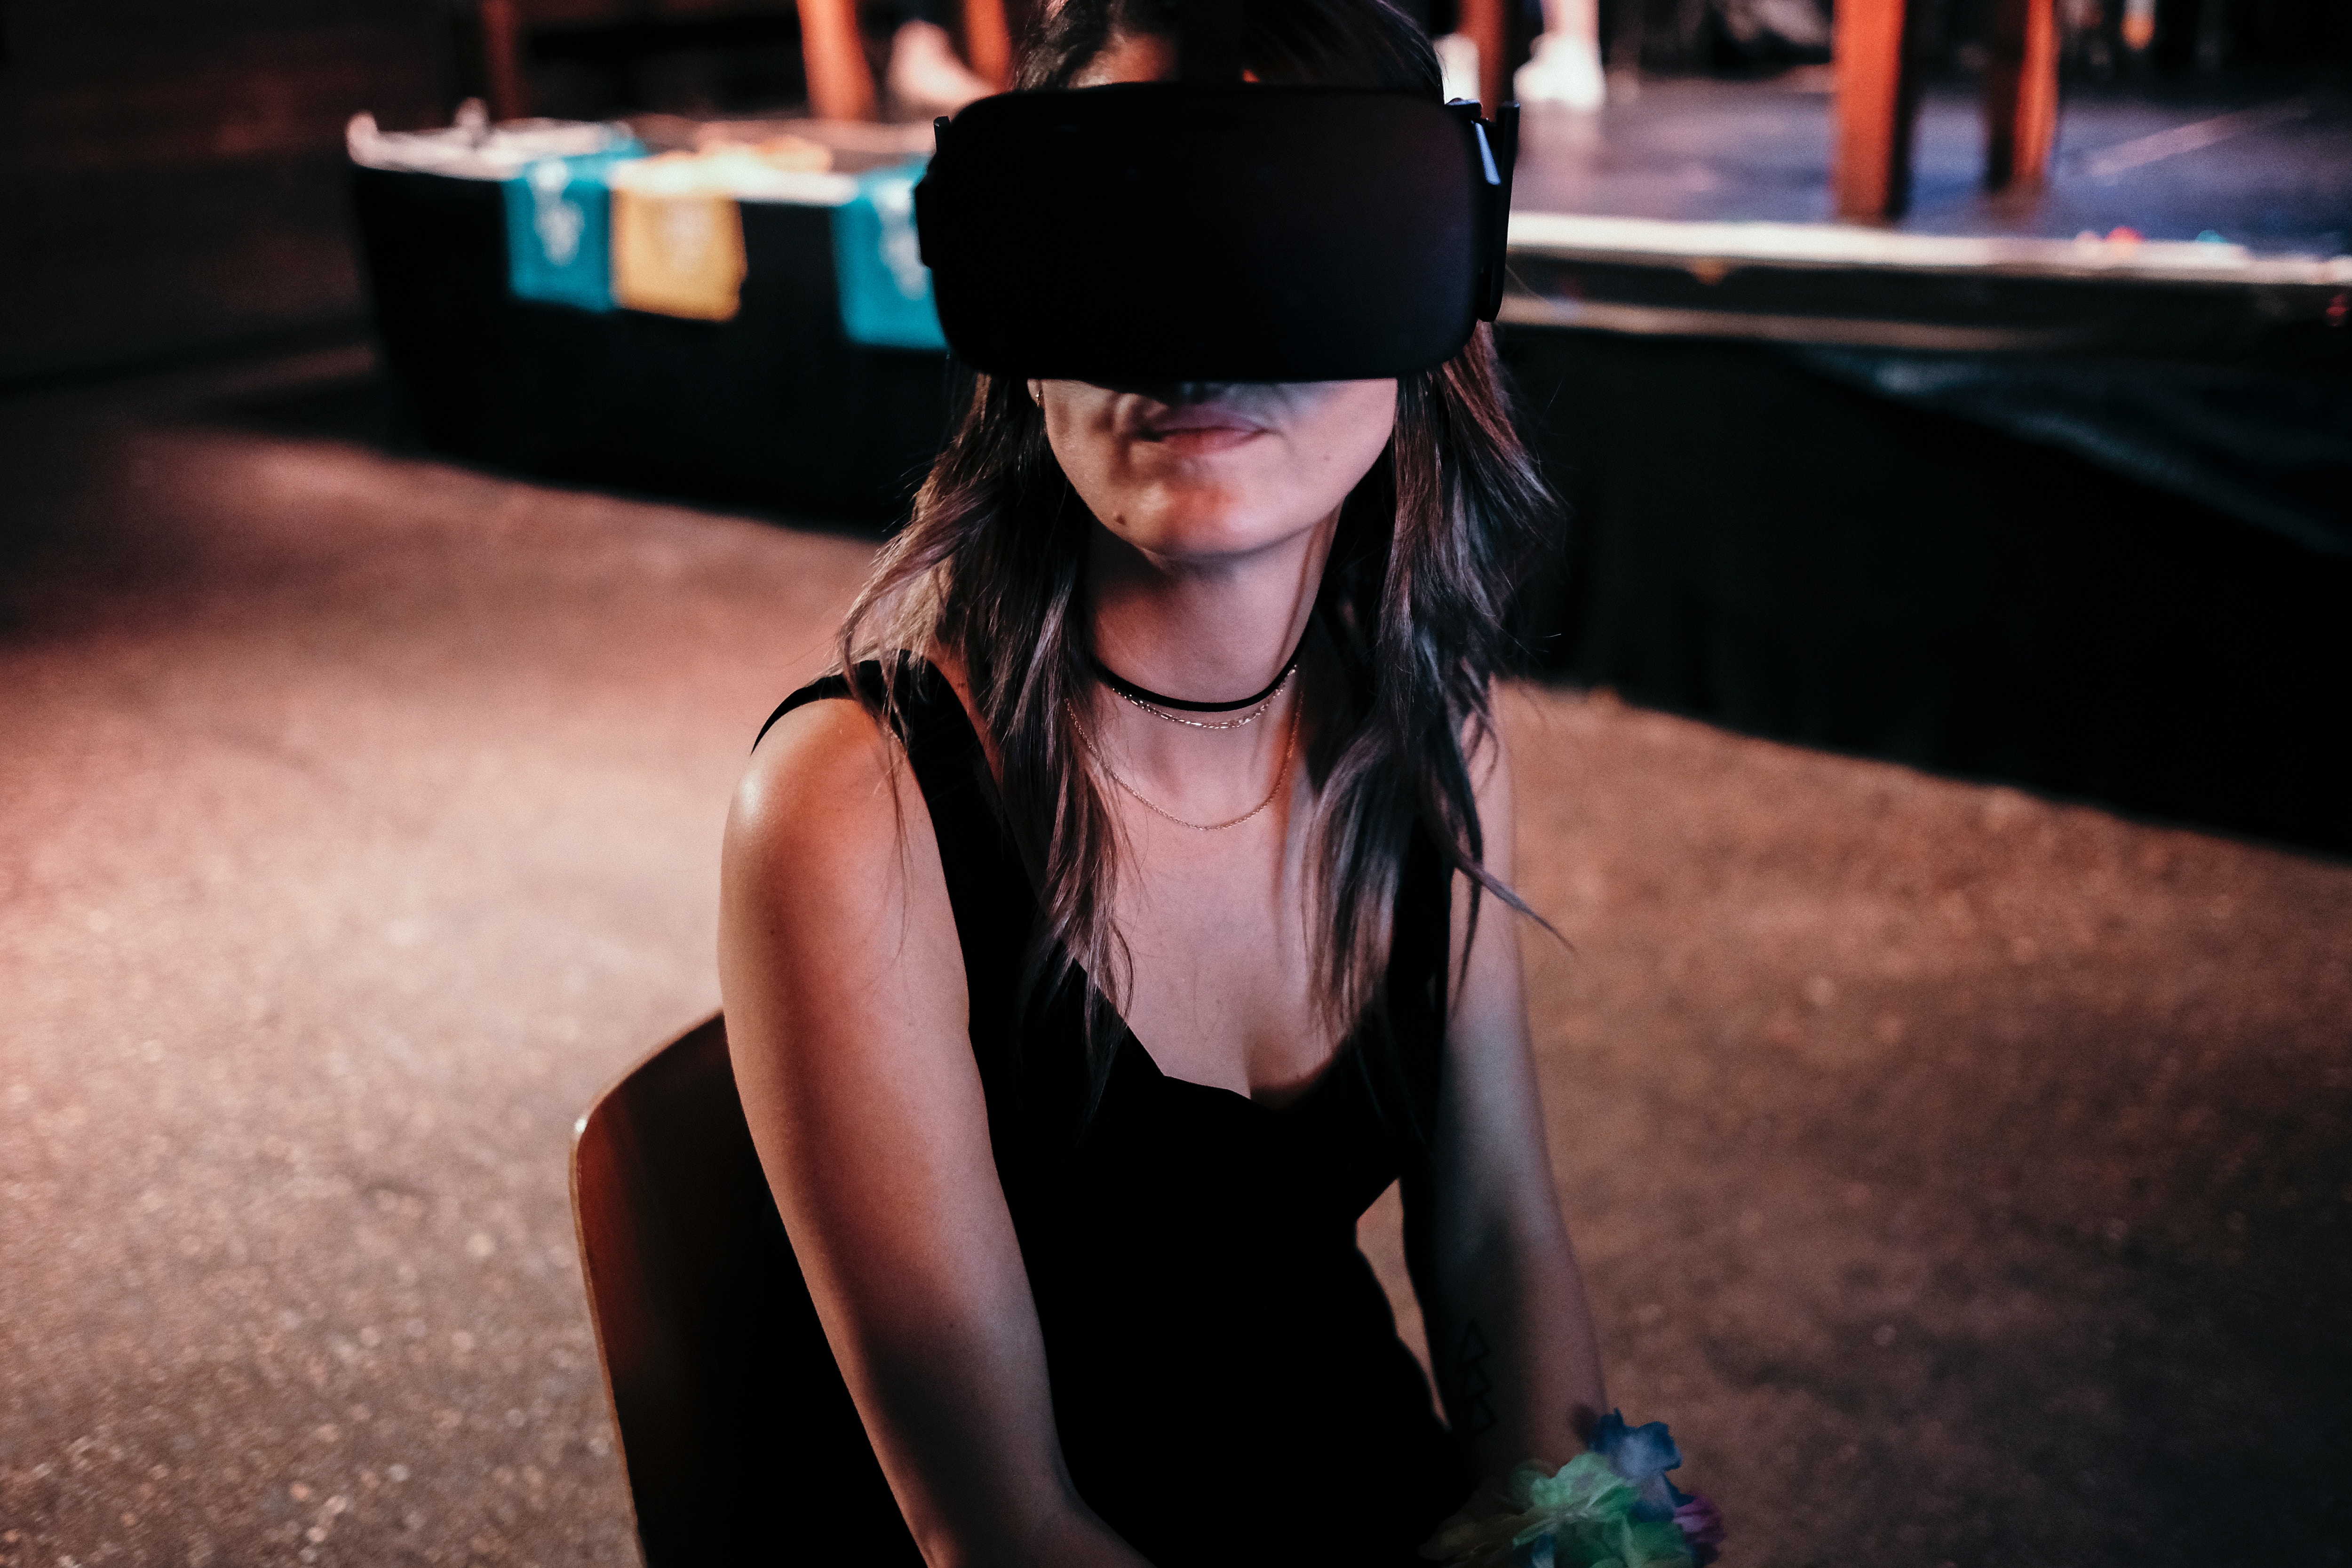 virtual reality is being used to combat a very real issue: sexual assault